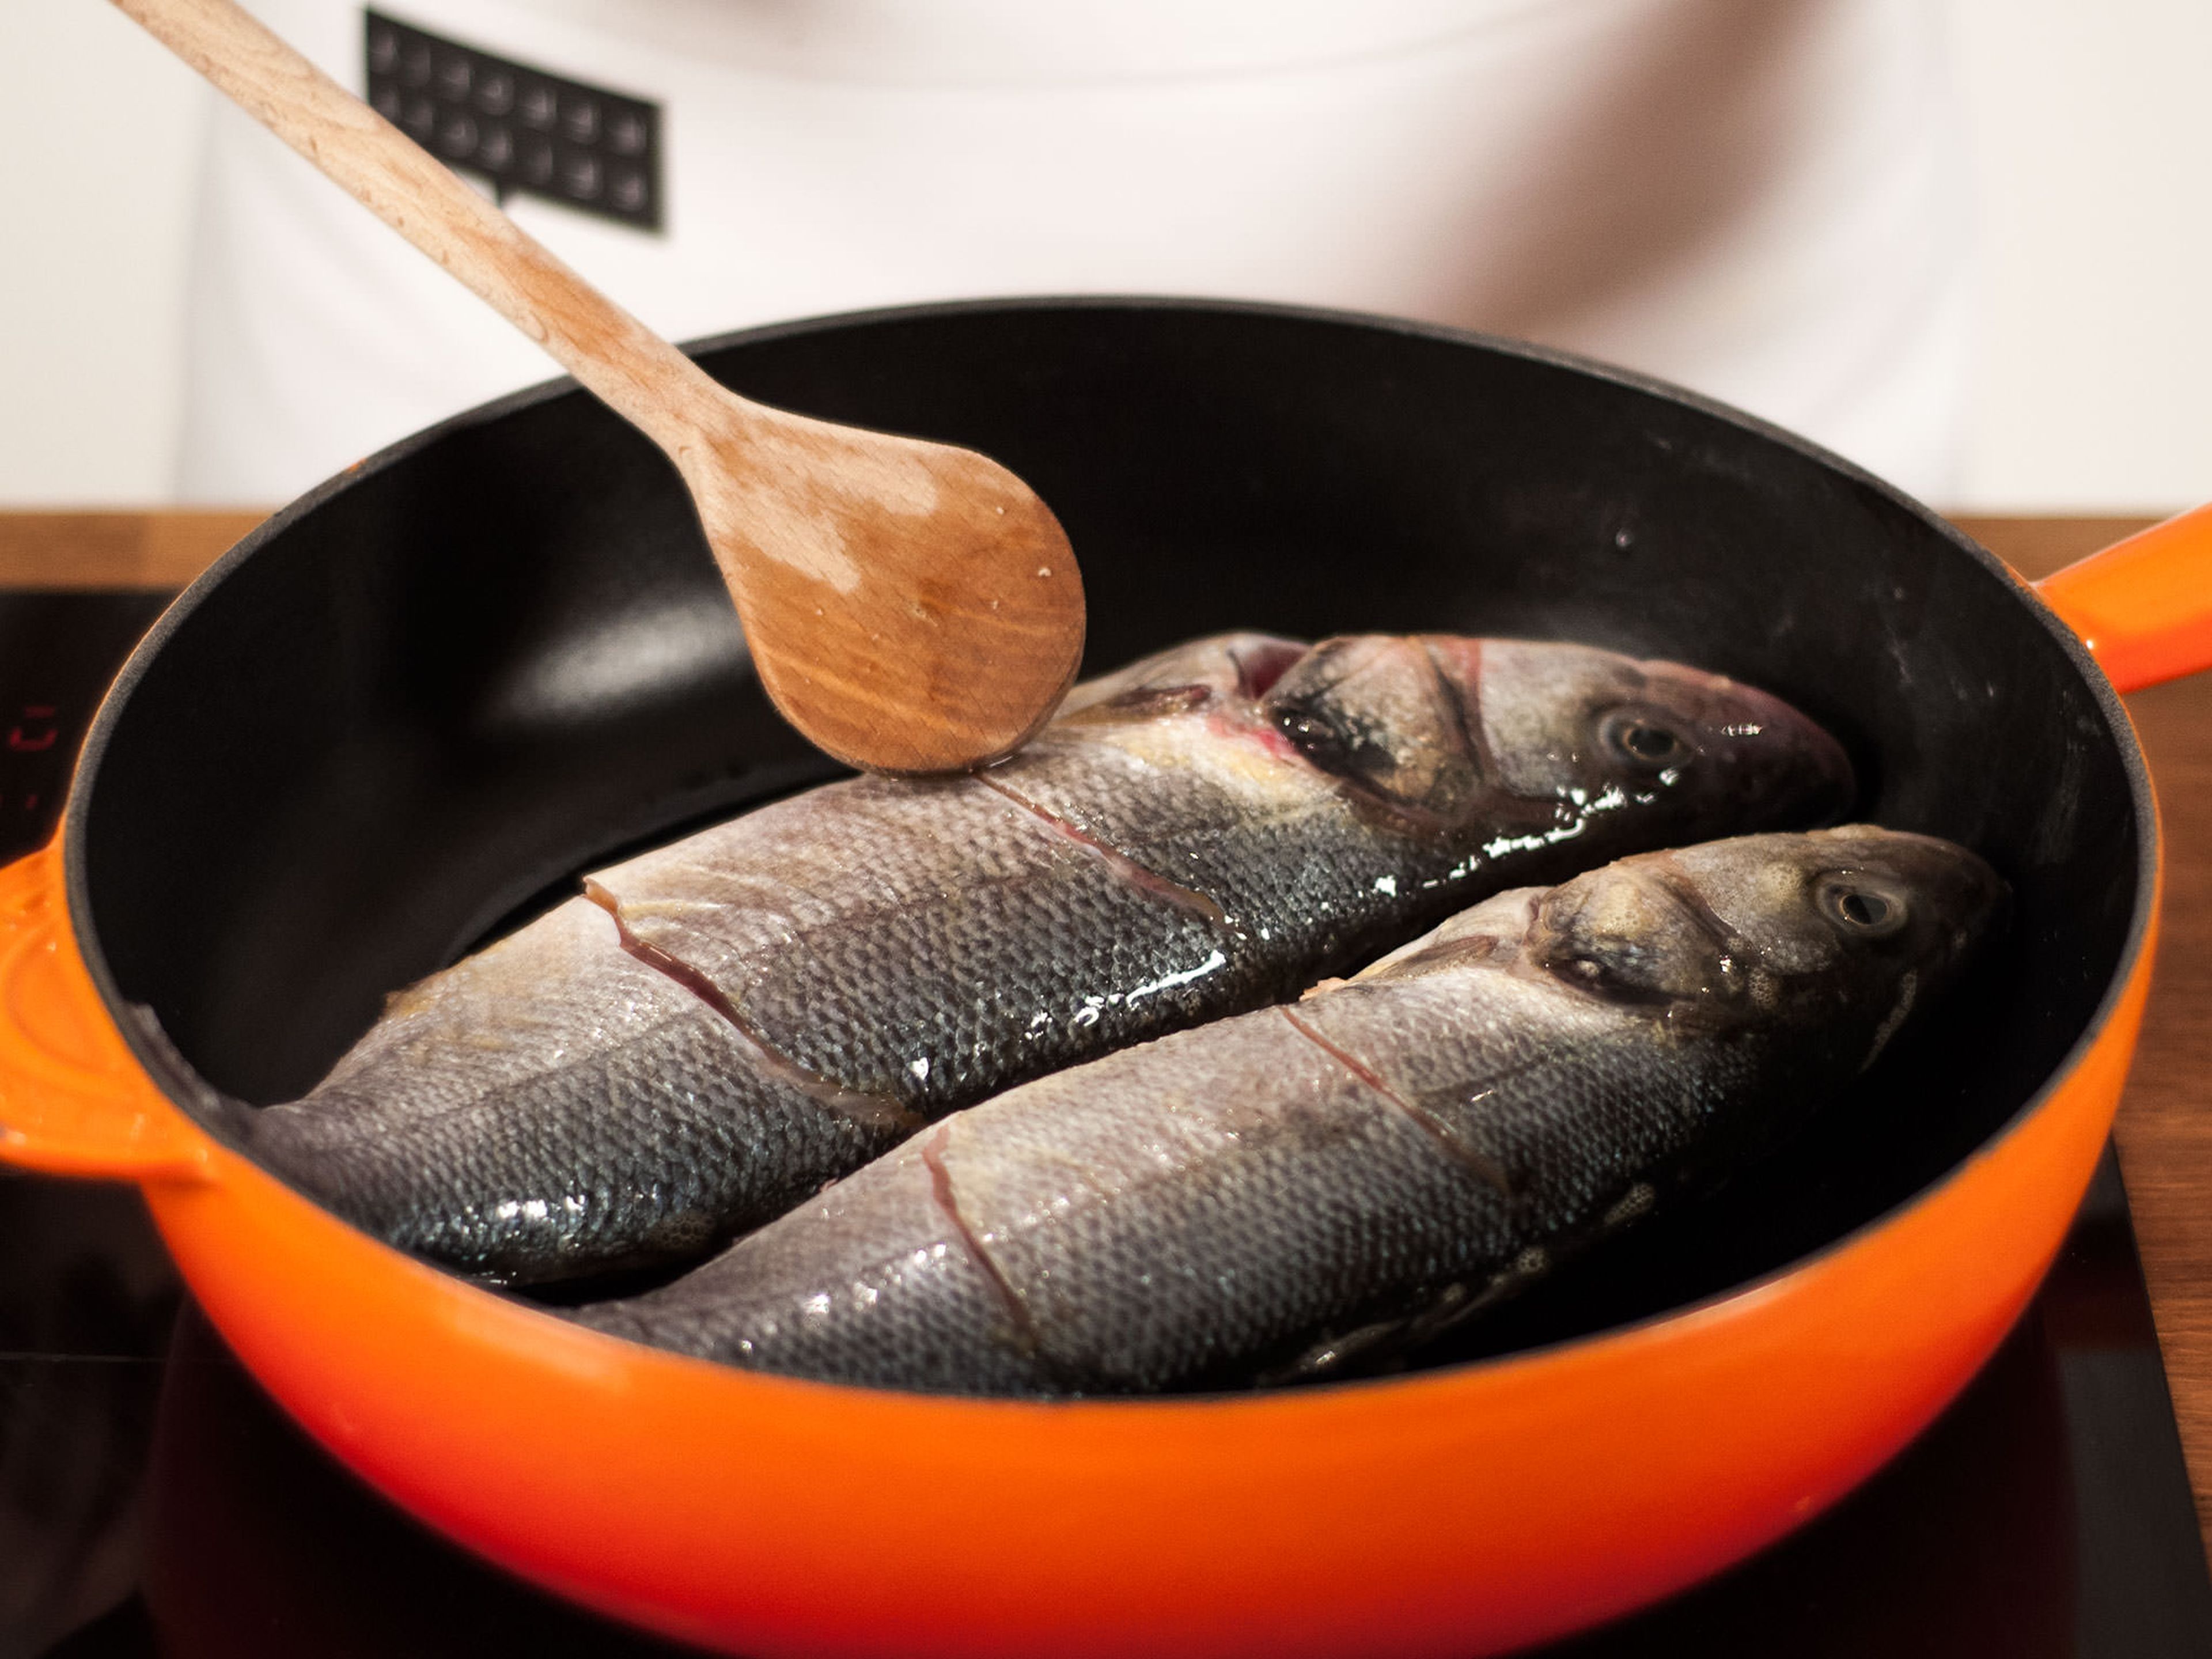 Preheat vegetable oil in a pan on medium-low heat. Place fish into pan and fry for approx. 1 min. on each side.